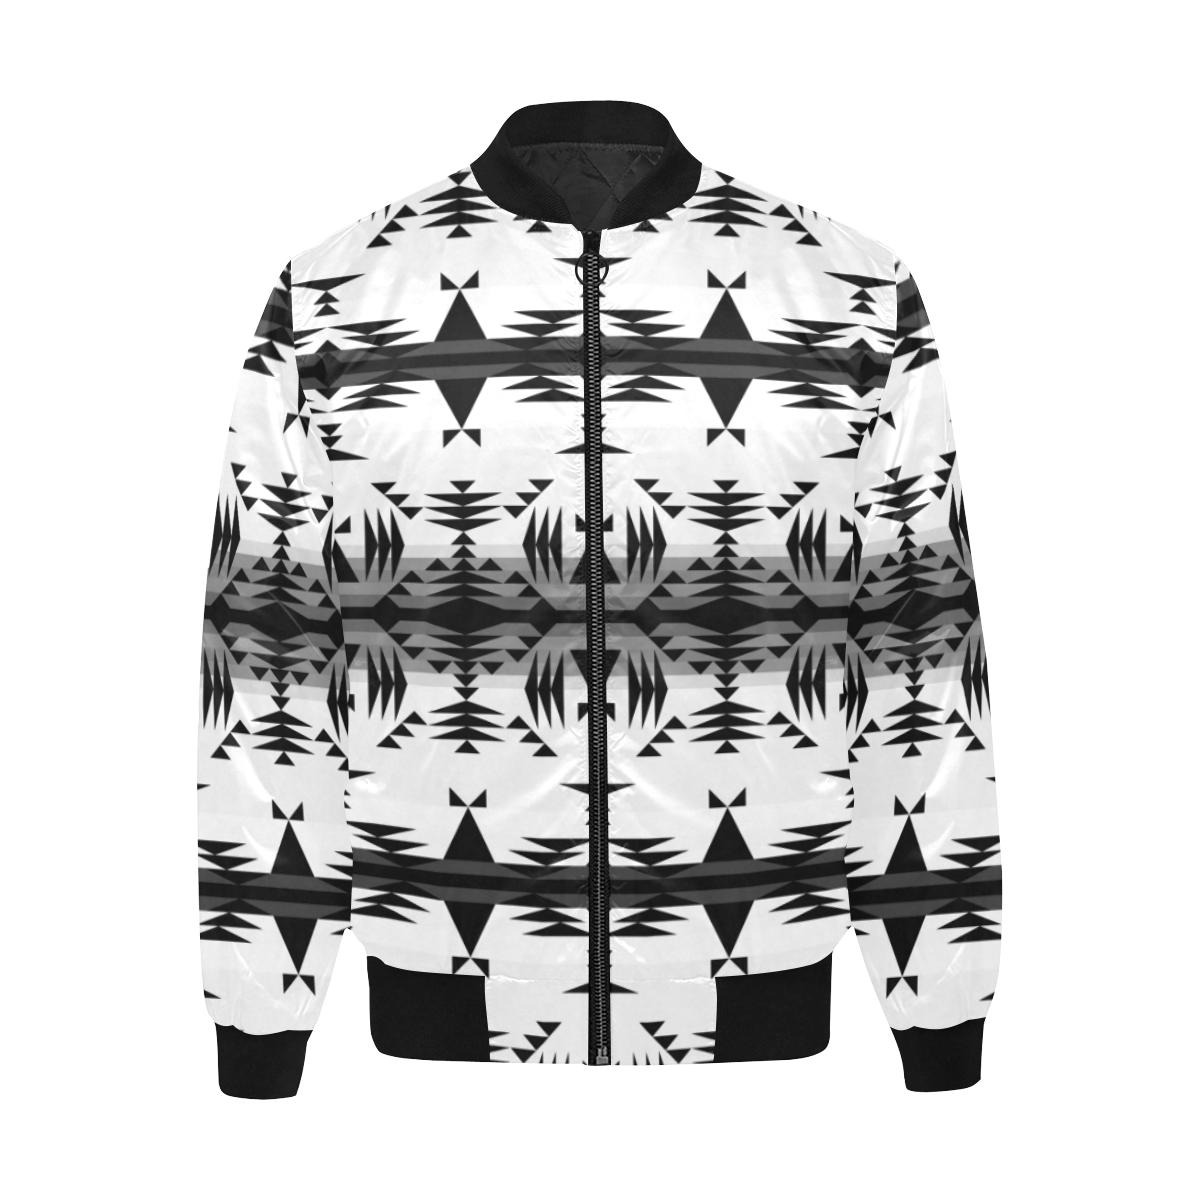 Between the Mountains White and Black Men's Heavy Bomber Jacket with Q ...